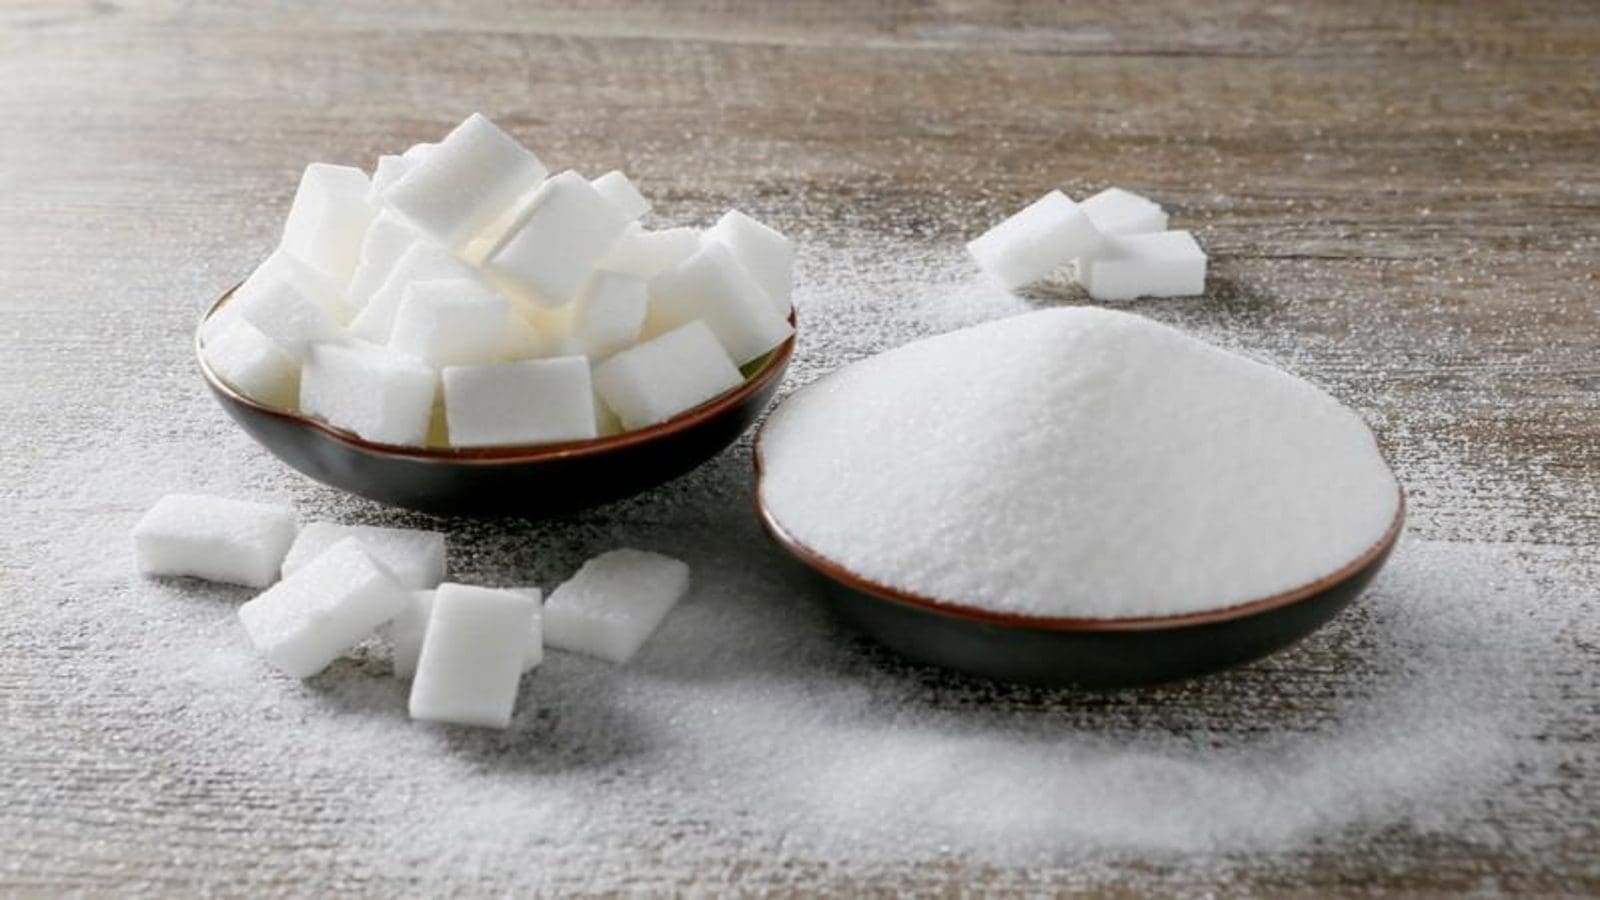 South African sugar industry achieves US$53.65M transformation funding milestone, urges government support 